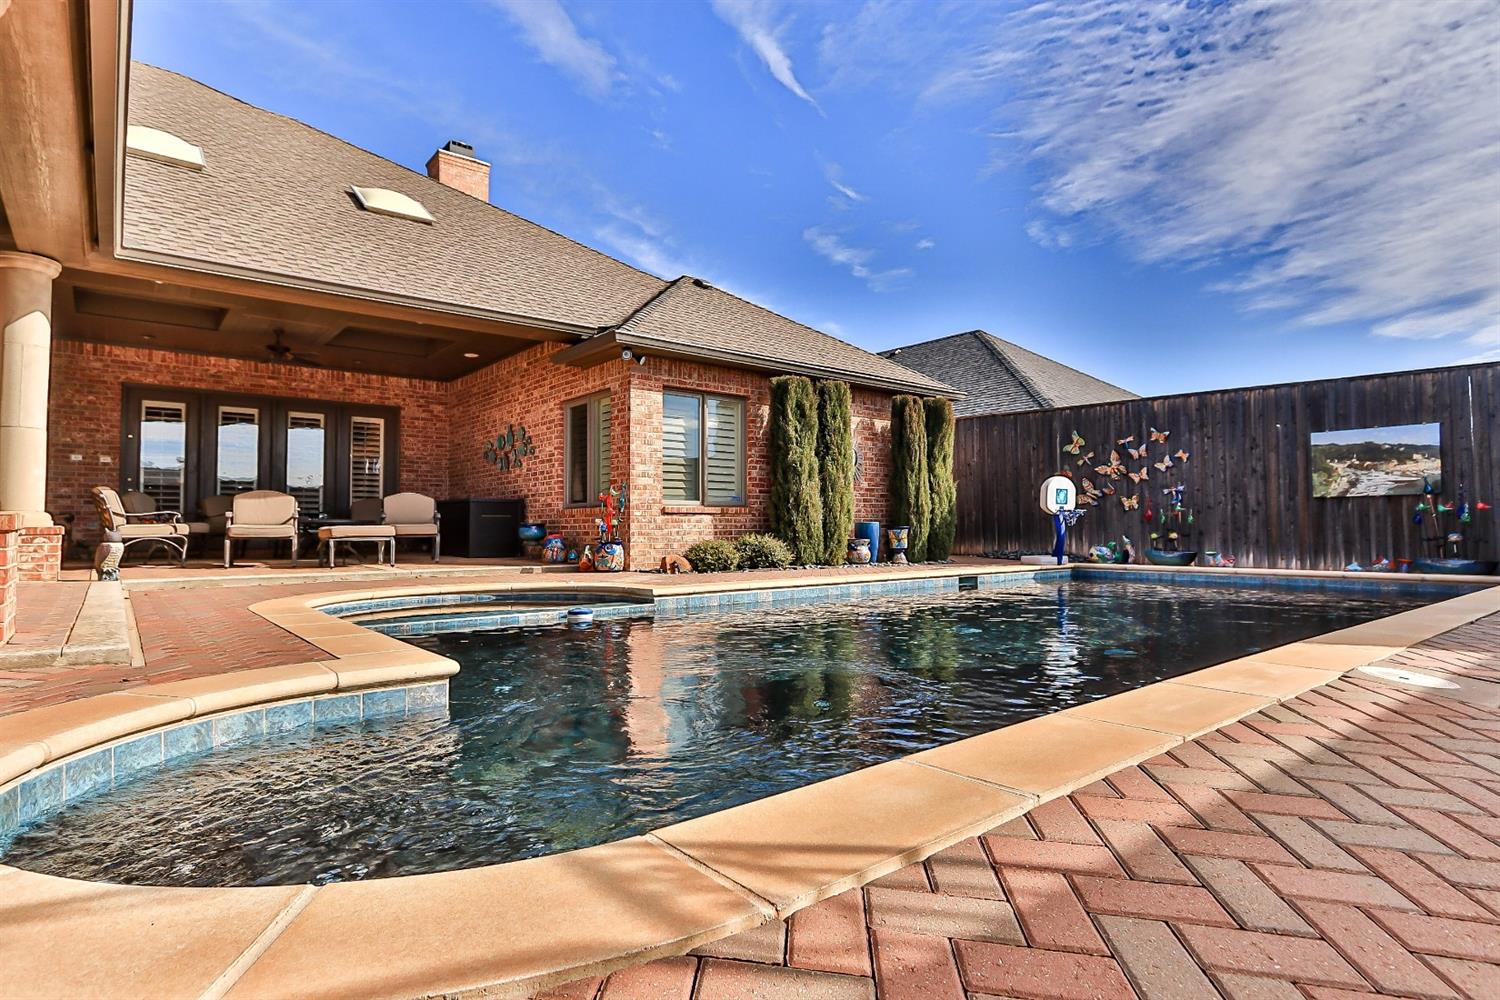 Enjoy relaxing in the backyard by the Swimming Pool